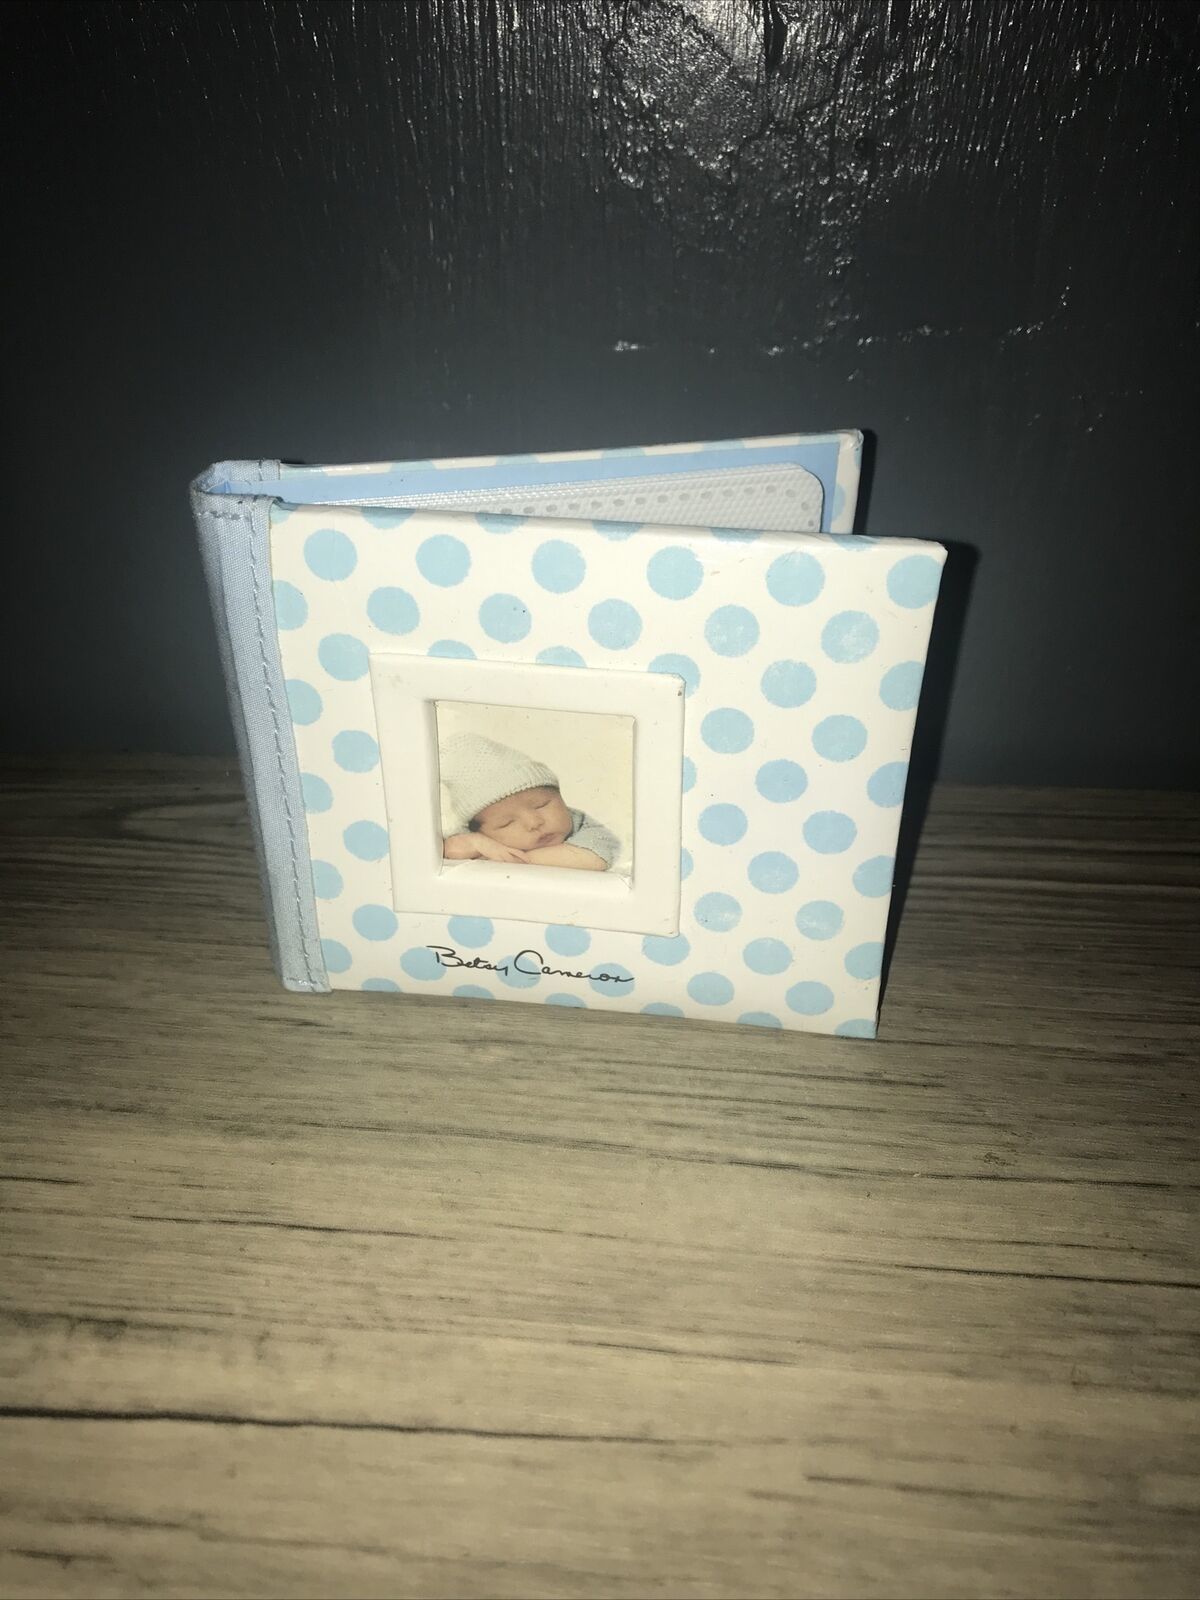 Mini Betsy Cameron Blue Baby Photo Album Holds 24 Photos 2.5 X 3 In